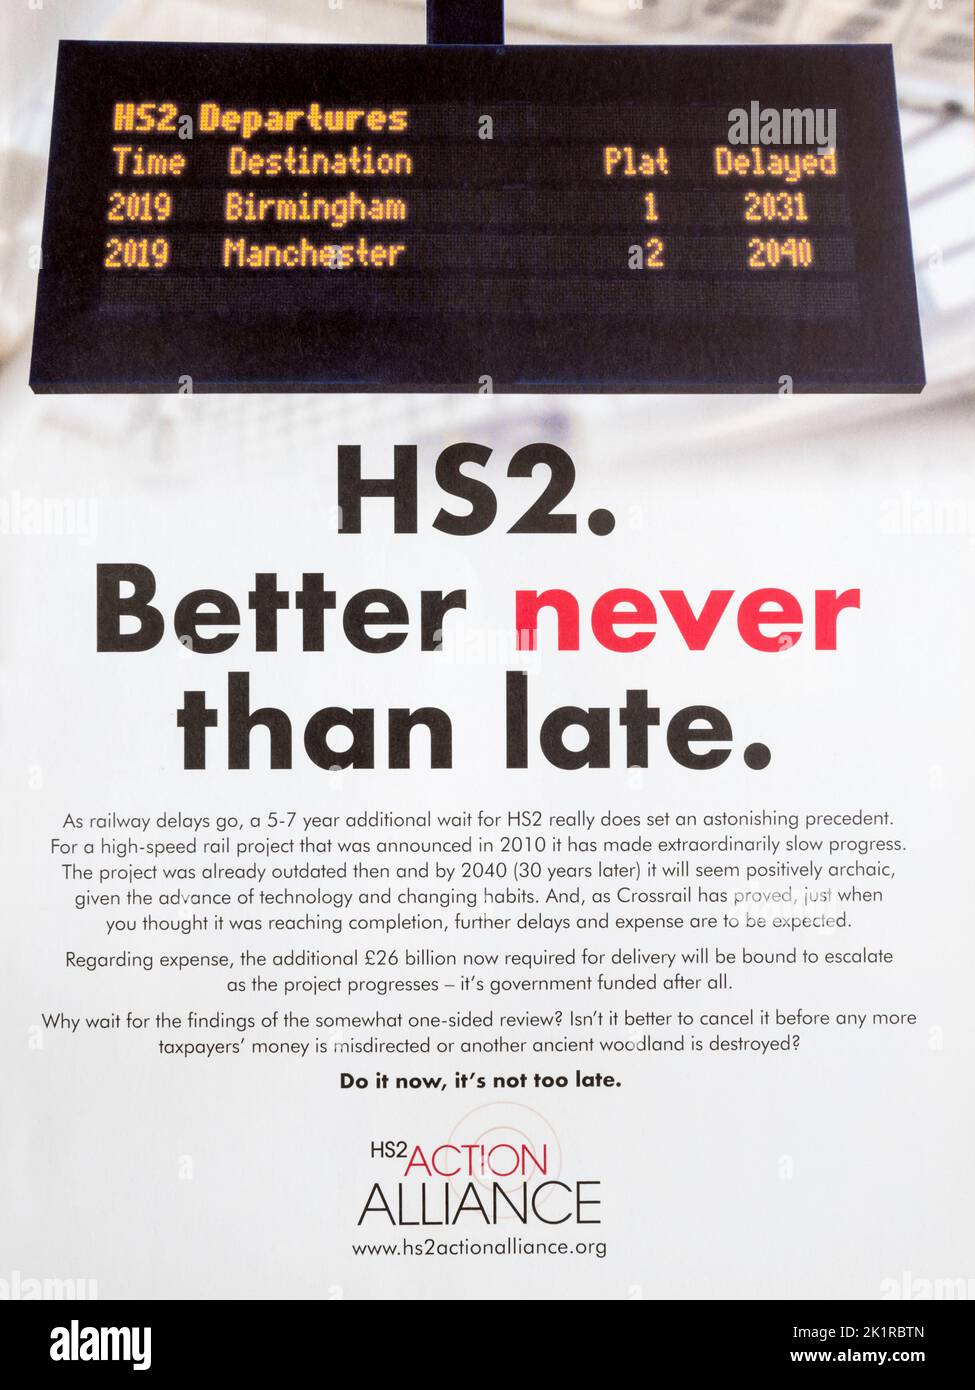 A 2019 advert by HS2 Action Alliance urges the cancellation of the HS2 high-speed rail project. Stock Photo